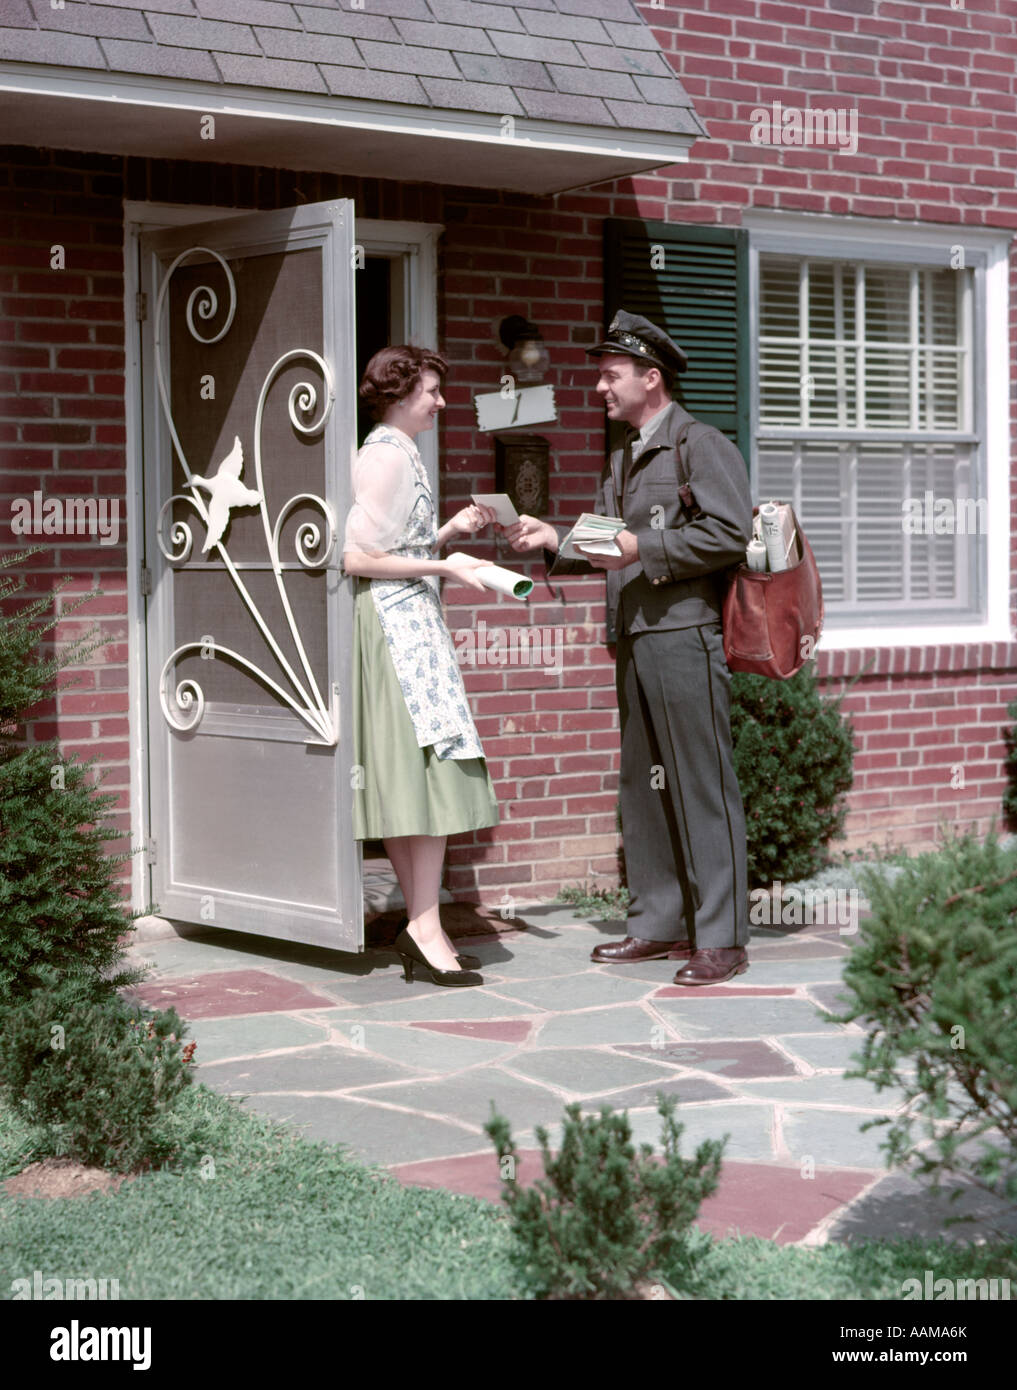 1950s MAILMAN DELIVERING MAIL TO WOMAN BRICK SUBURBAN HOME ALUMINUM SCREEN DOOR DELIVERY MAN HOUSEWIFE MAILBAG LETTER Stock Photo